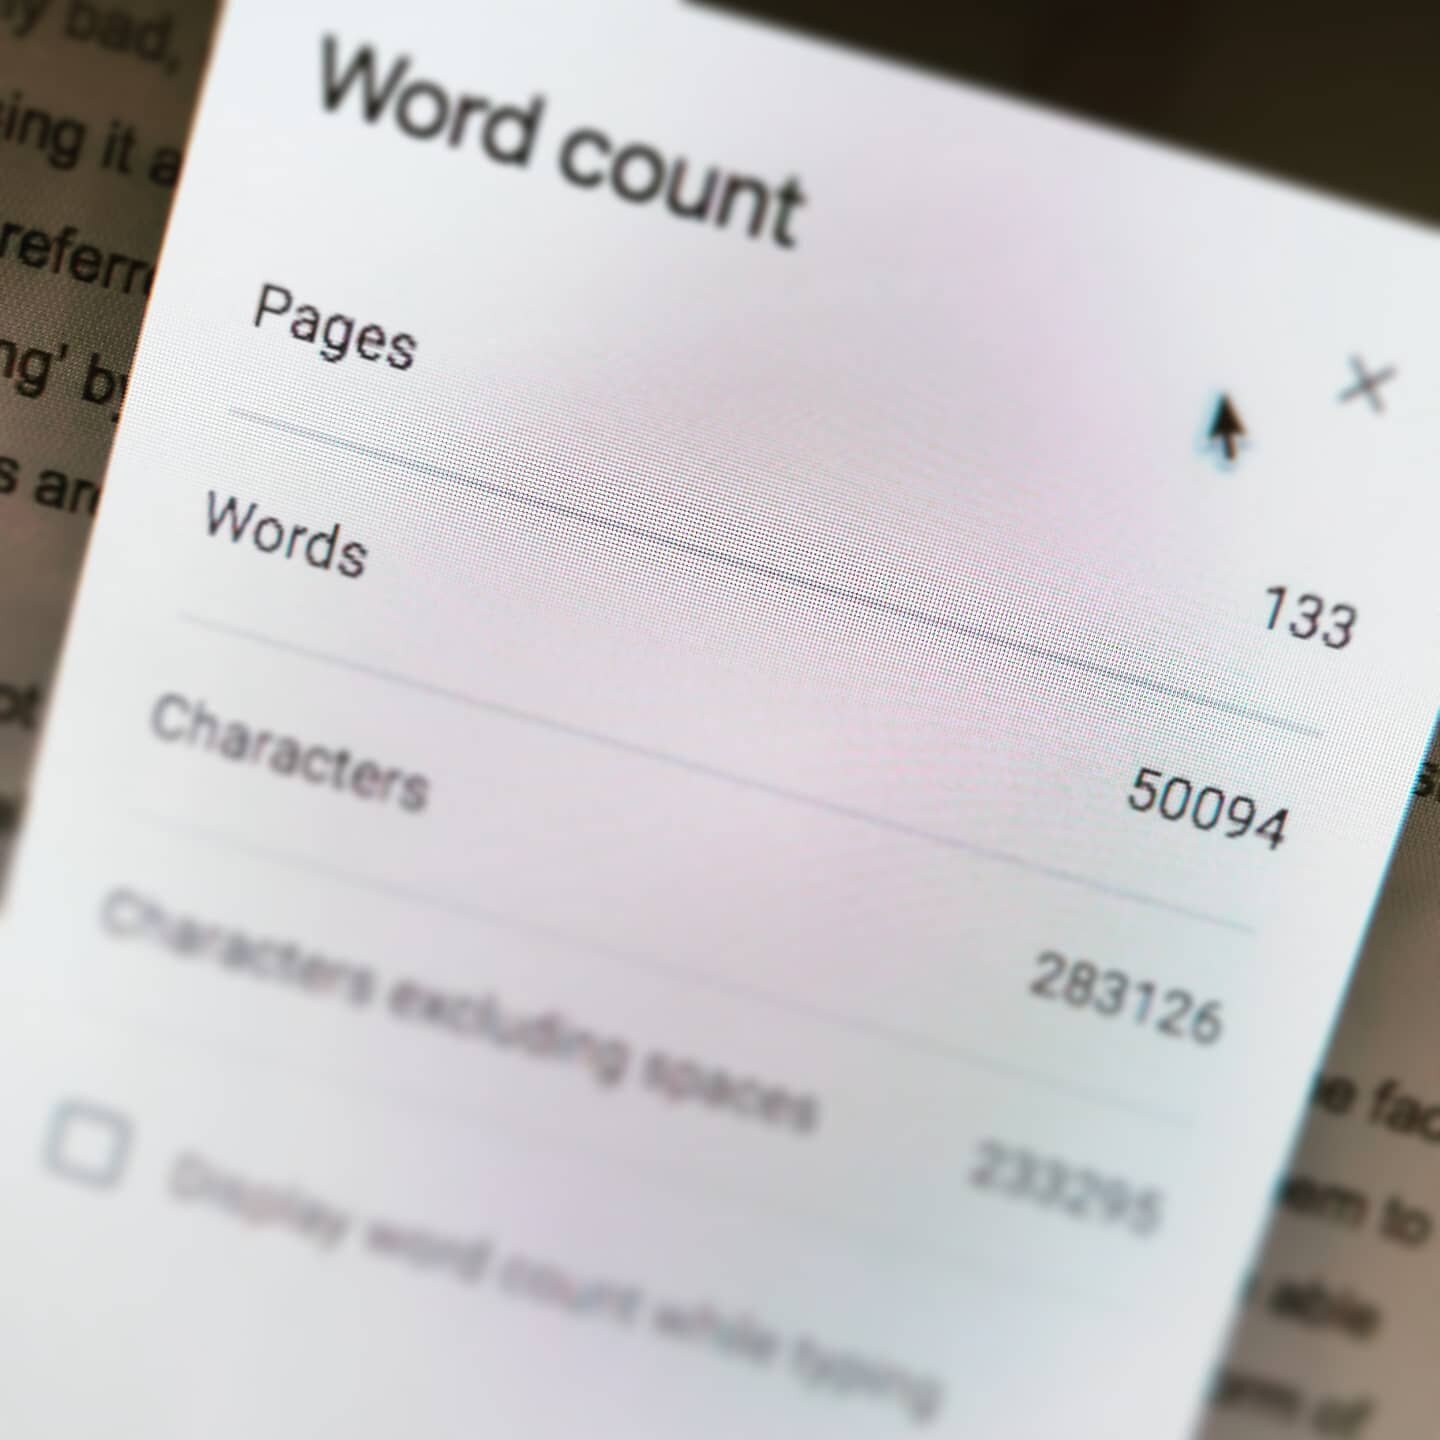 In the background I have been writing a book about working with teenagers and young adults, supporting them and having the honour to walk alongside on their journeys. It's not quite finished but this feels like a major milestone! #50,000words #therap